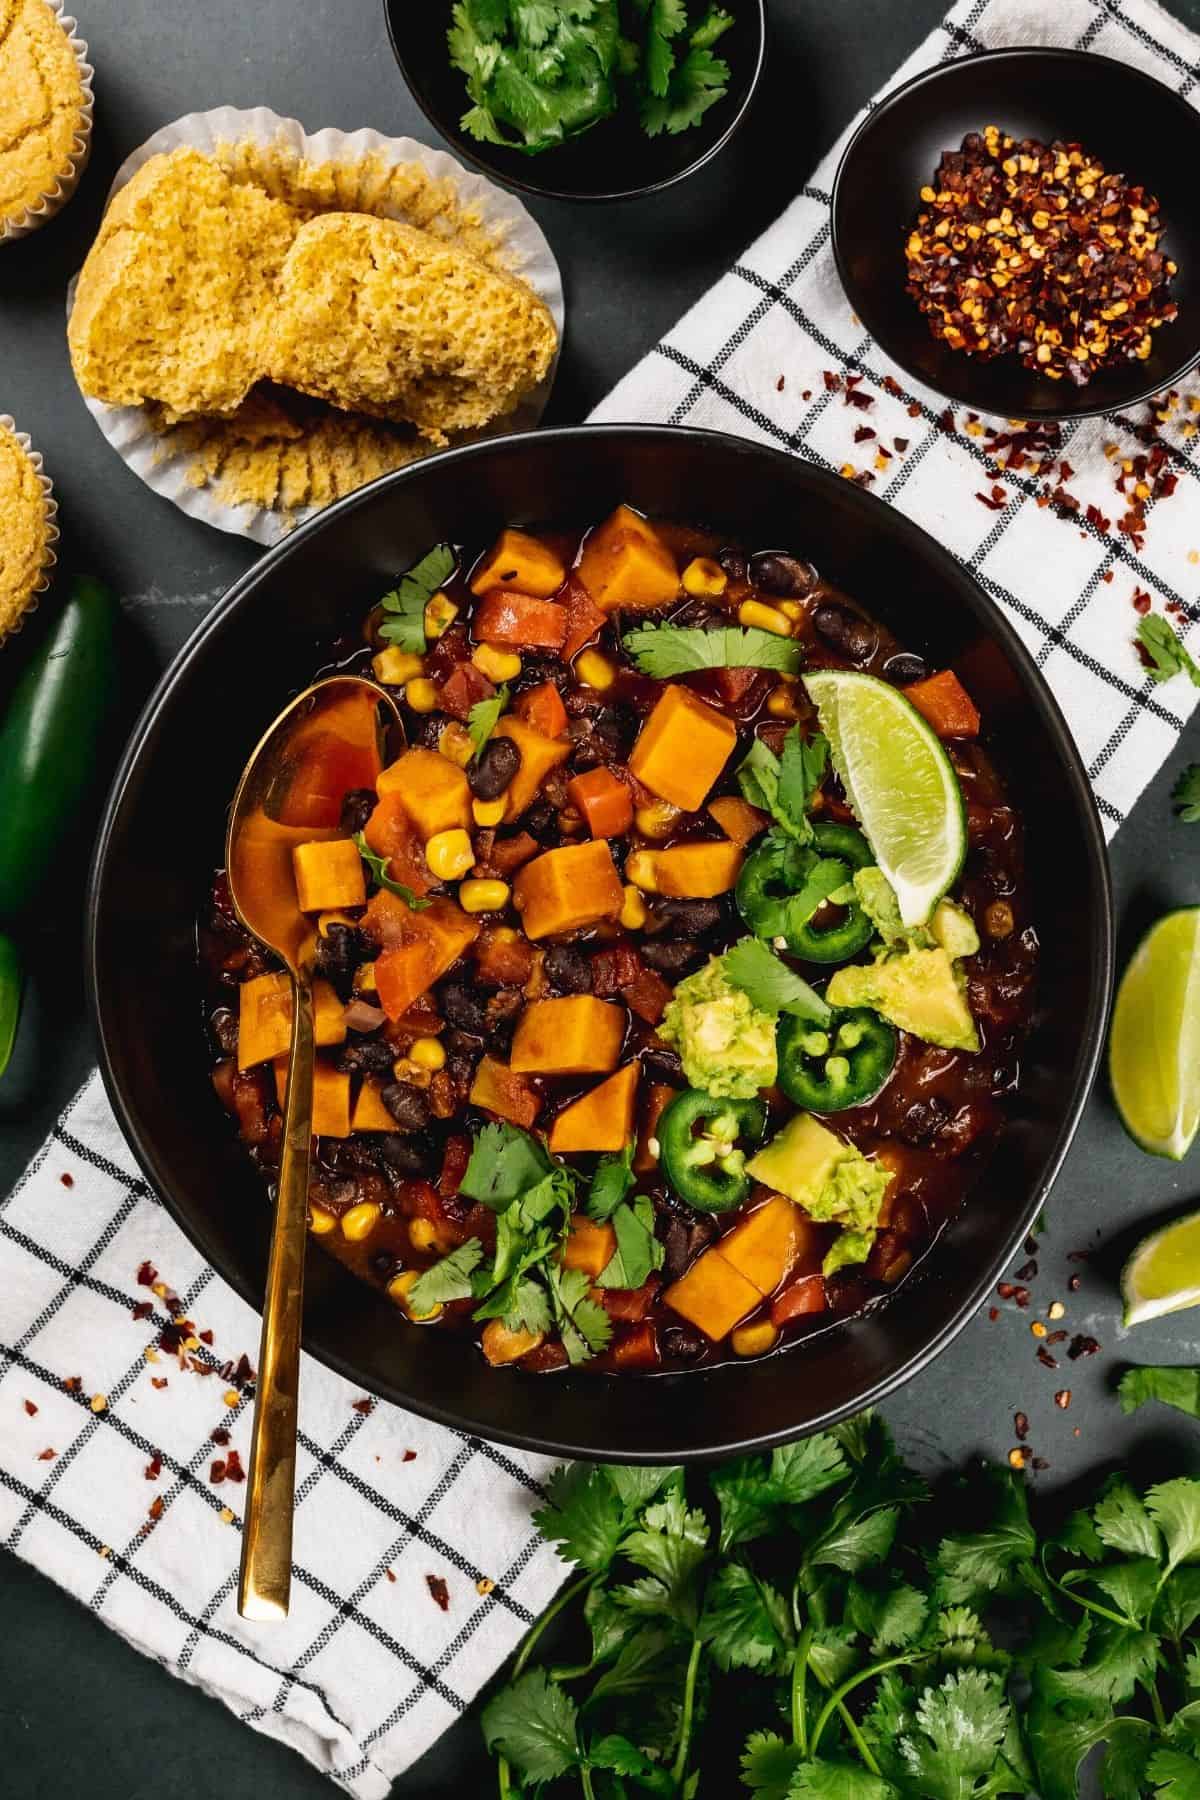 A big black bowl filled with sweet potato and black bean chili with many toppings on it like avocado, peppers, and cilantro. More toppings surround the bowl as it rests on a white towel.